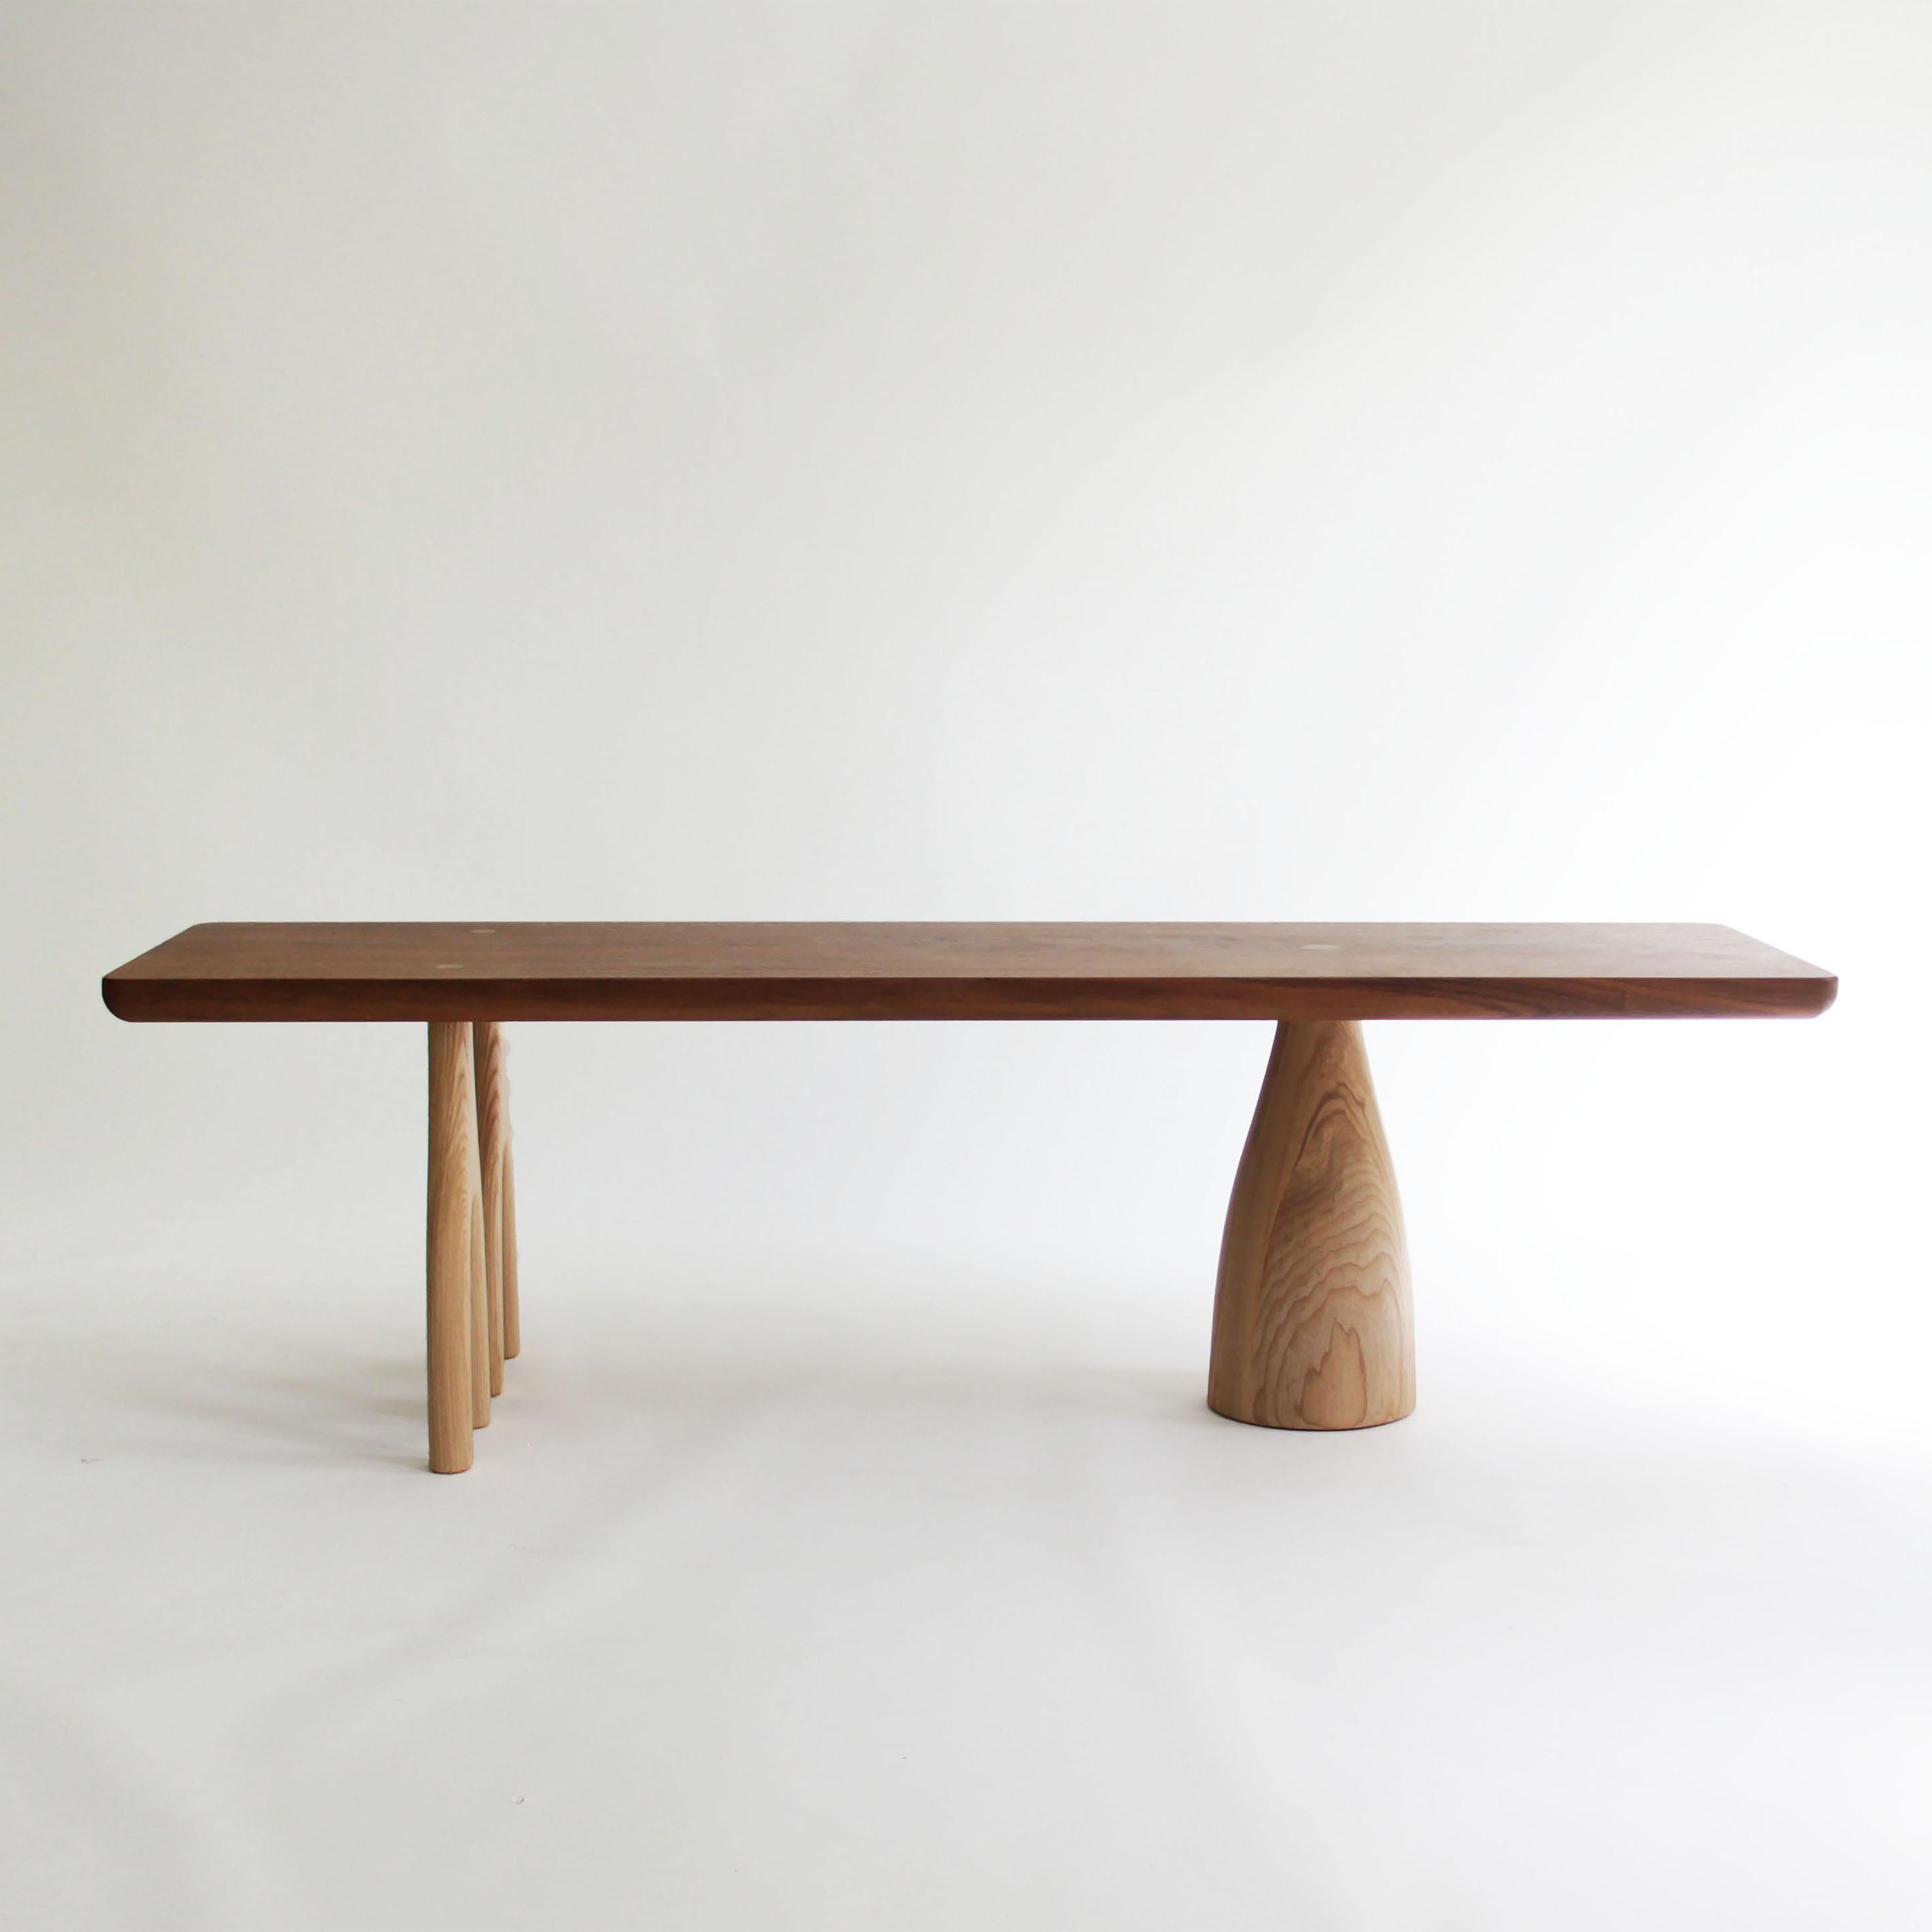 Turned Mezcal, Asymmetrical Rectangle Walnut and Ash Coffee Table by SinCa Design